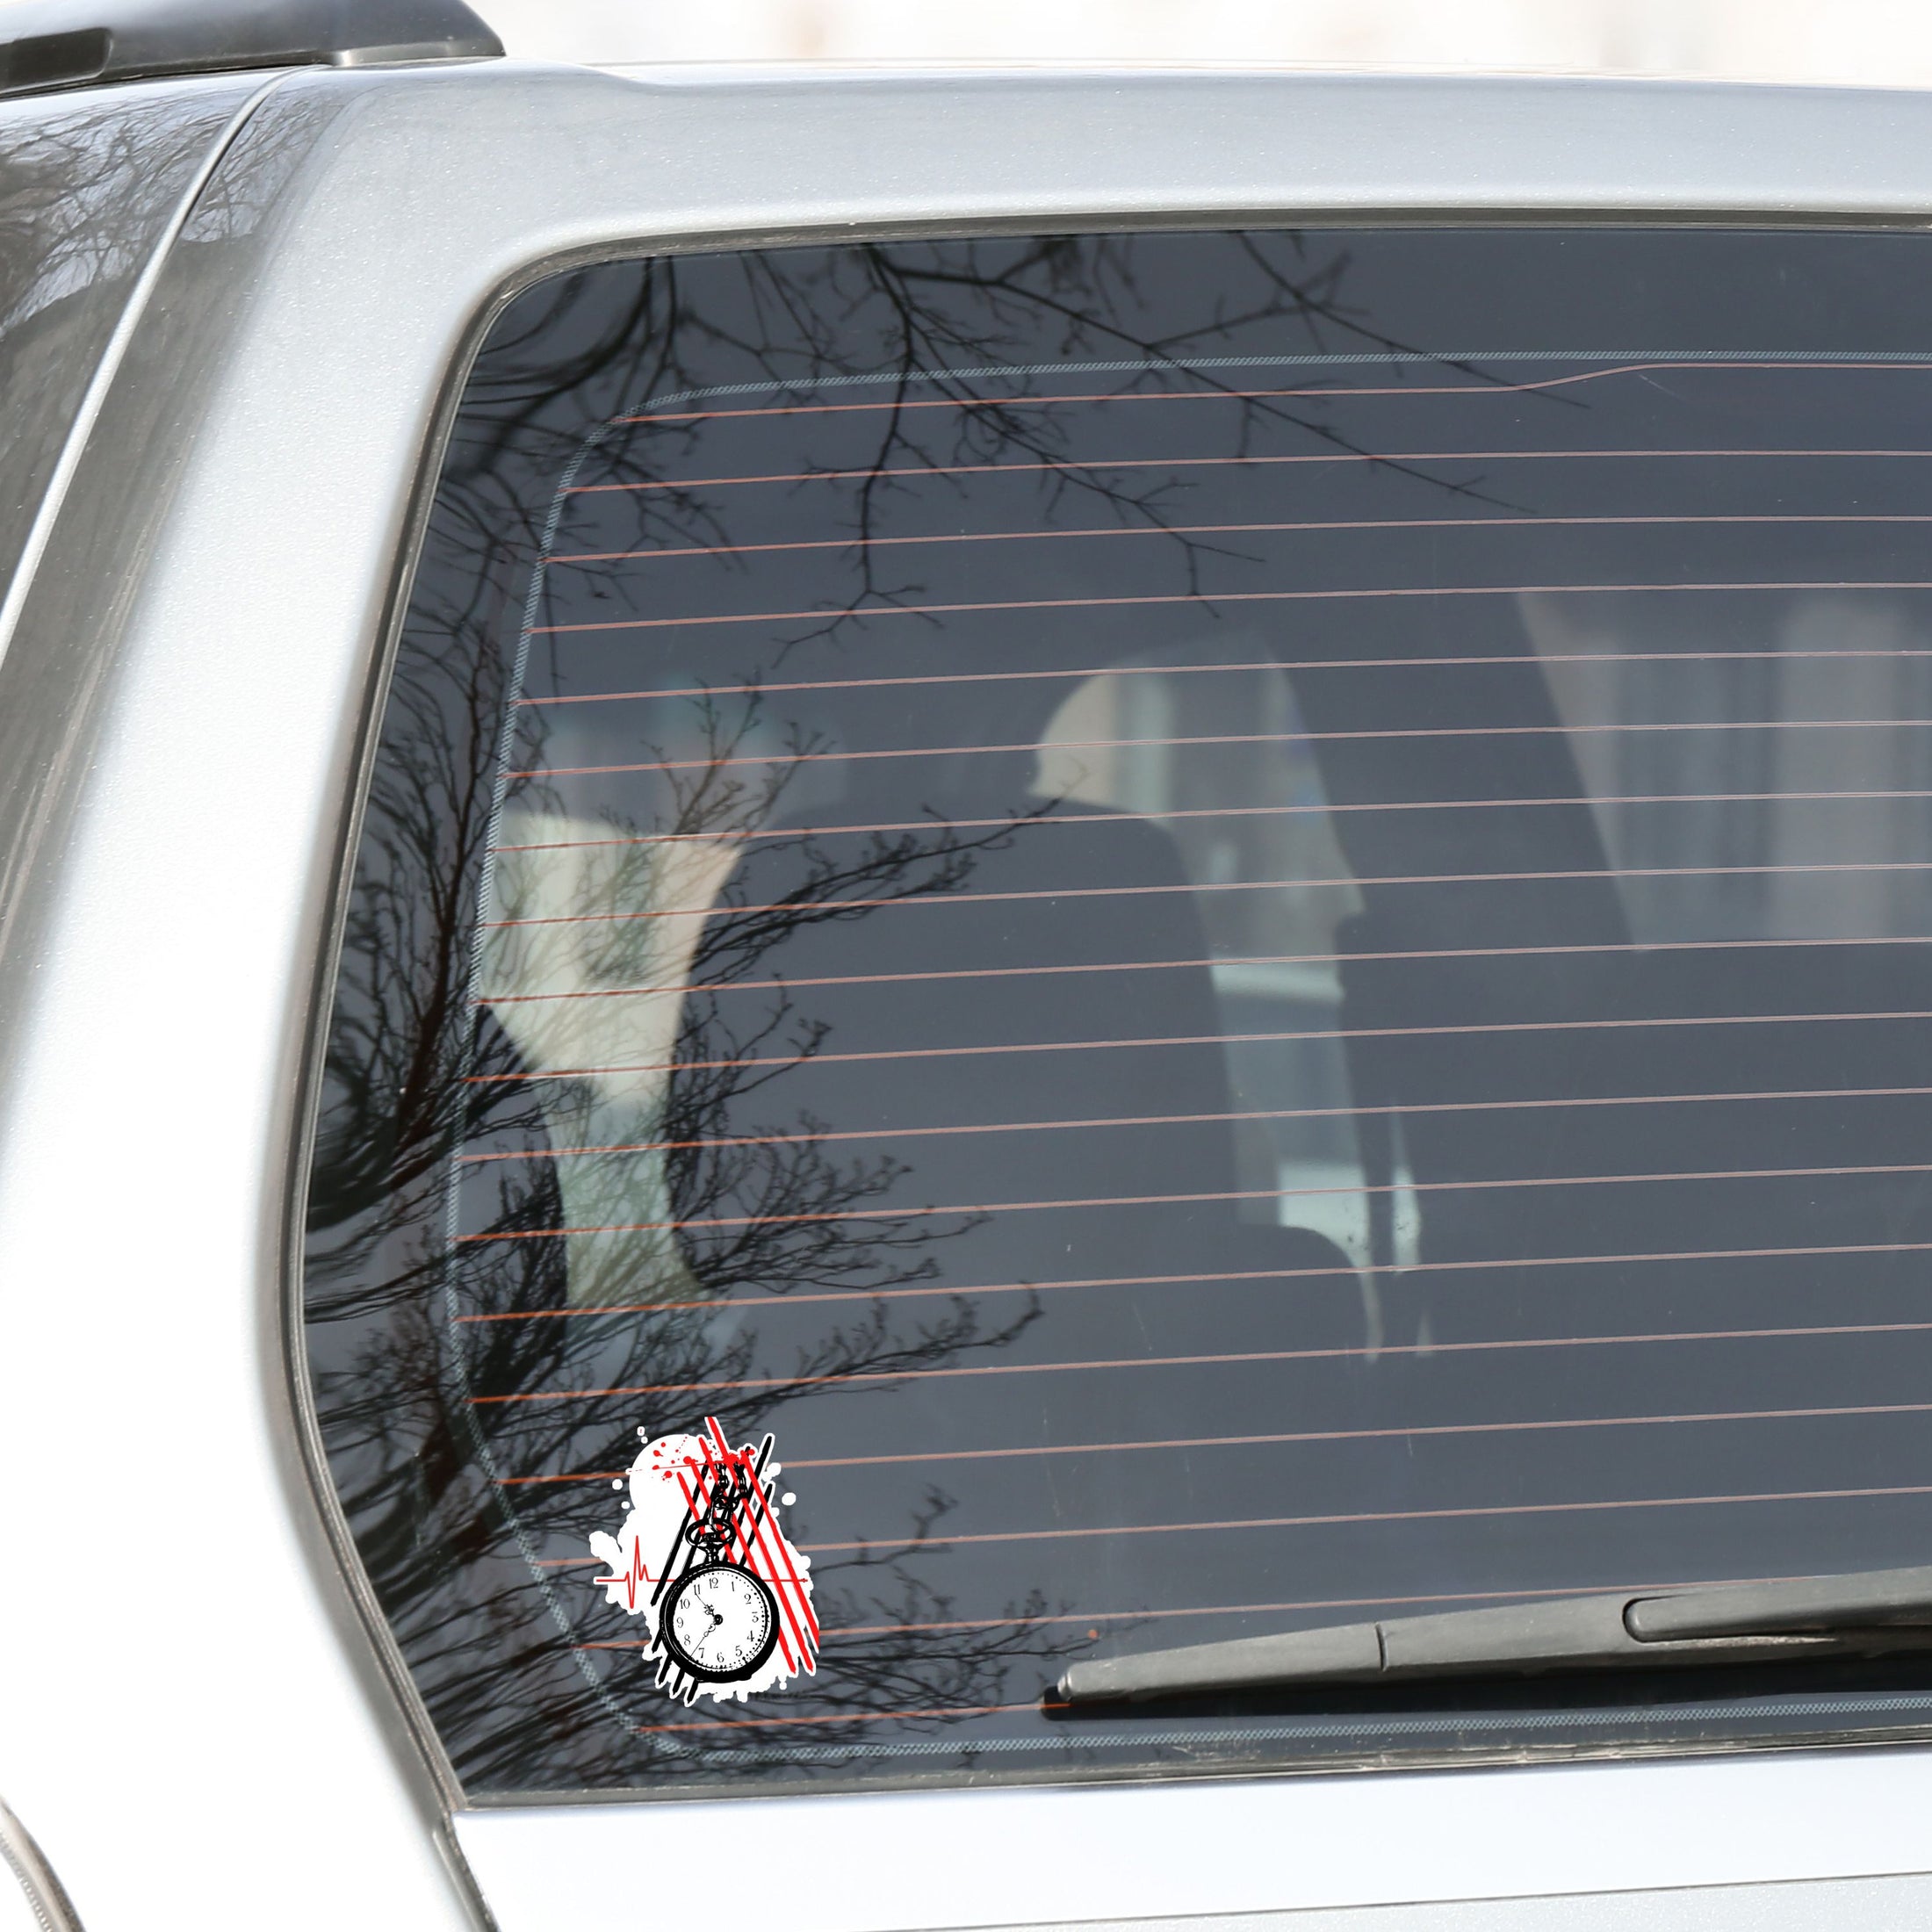 Trash Polka uses red, black, and white with a combination of abstract, surrealistic, and realistic images, and this individual die-cut sticker features a black and white pocket watch with red and black stripes behind.  This image shows the trash polka pocket watch sticker on the rear window of a car.